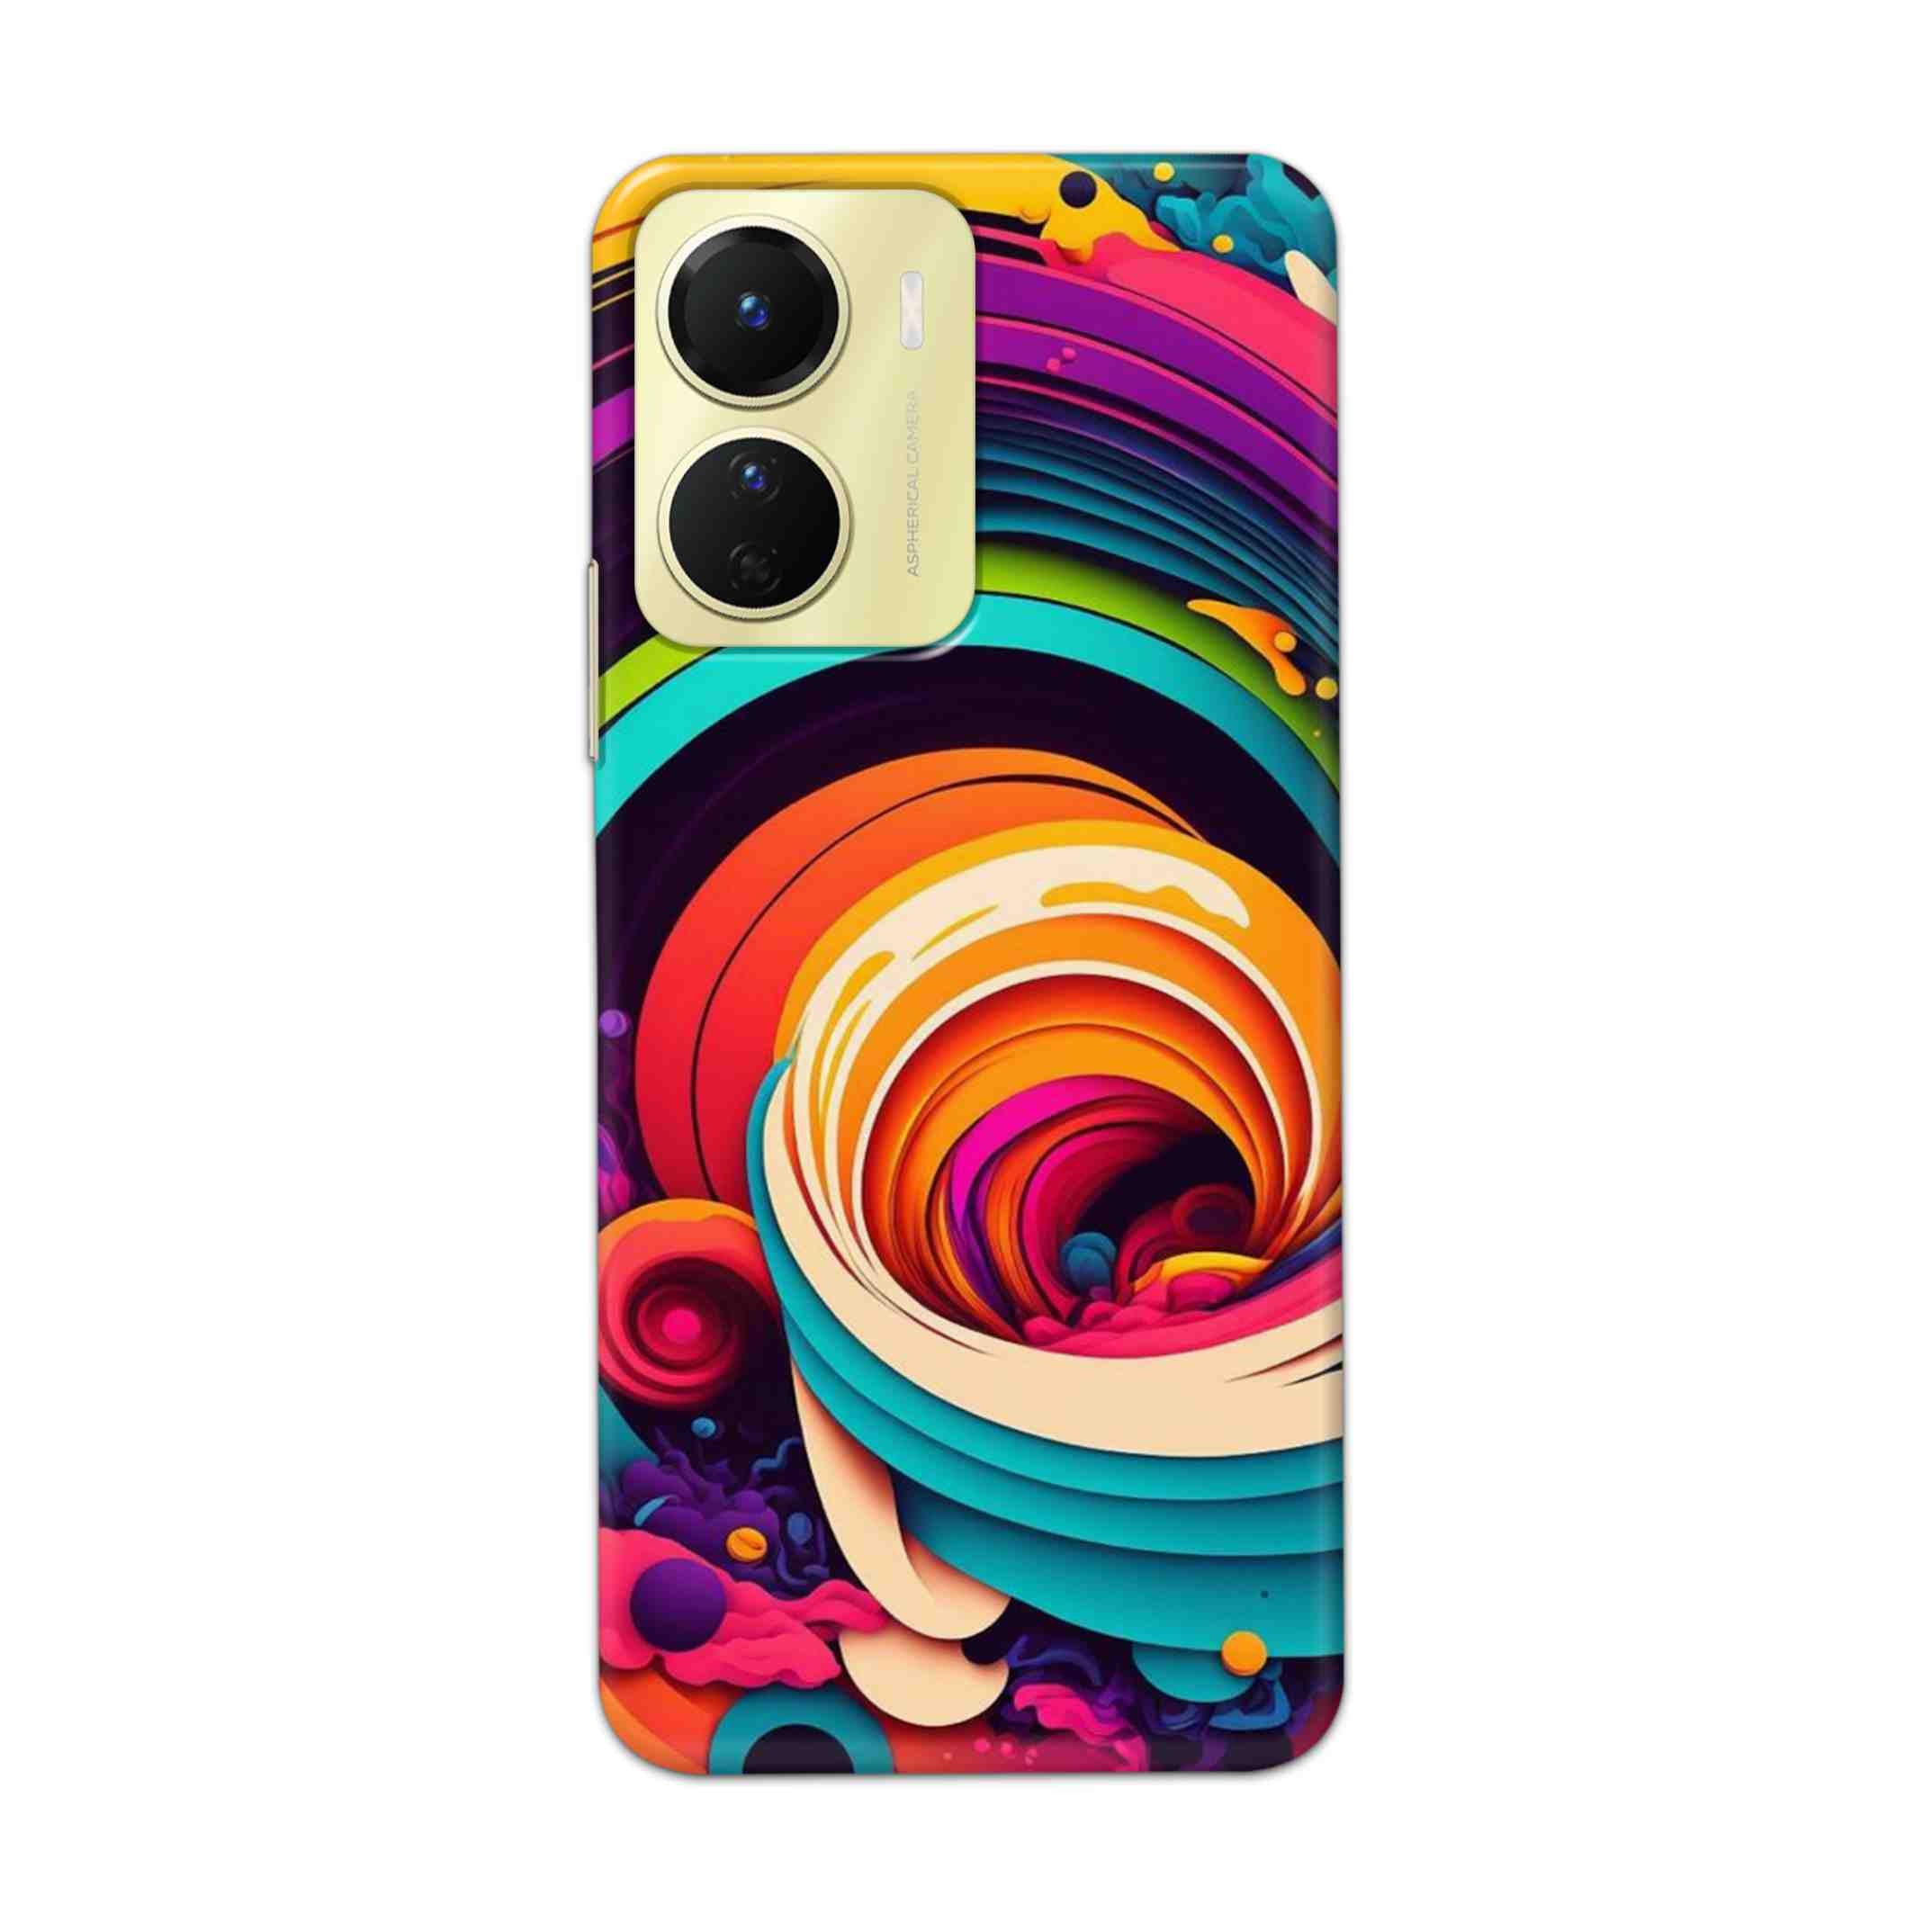 Buy Colour Circle Hard Back Mobile Phone Case Cover For Vivo Y16 Online